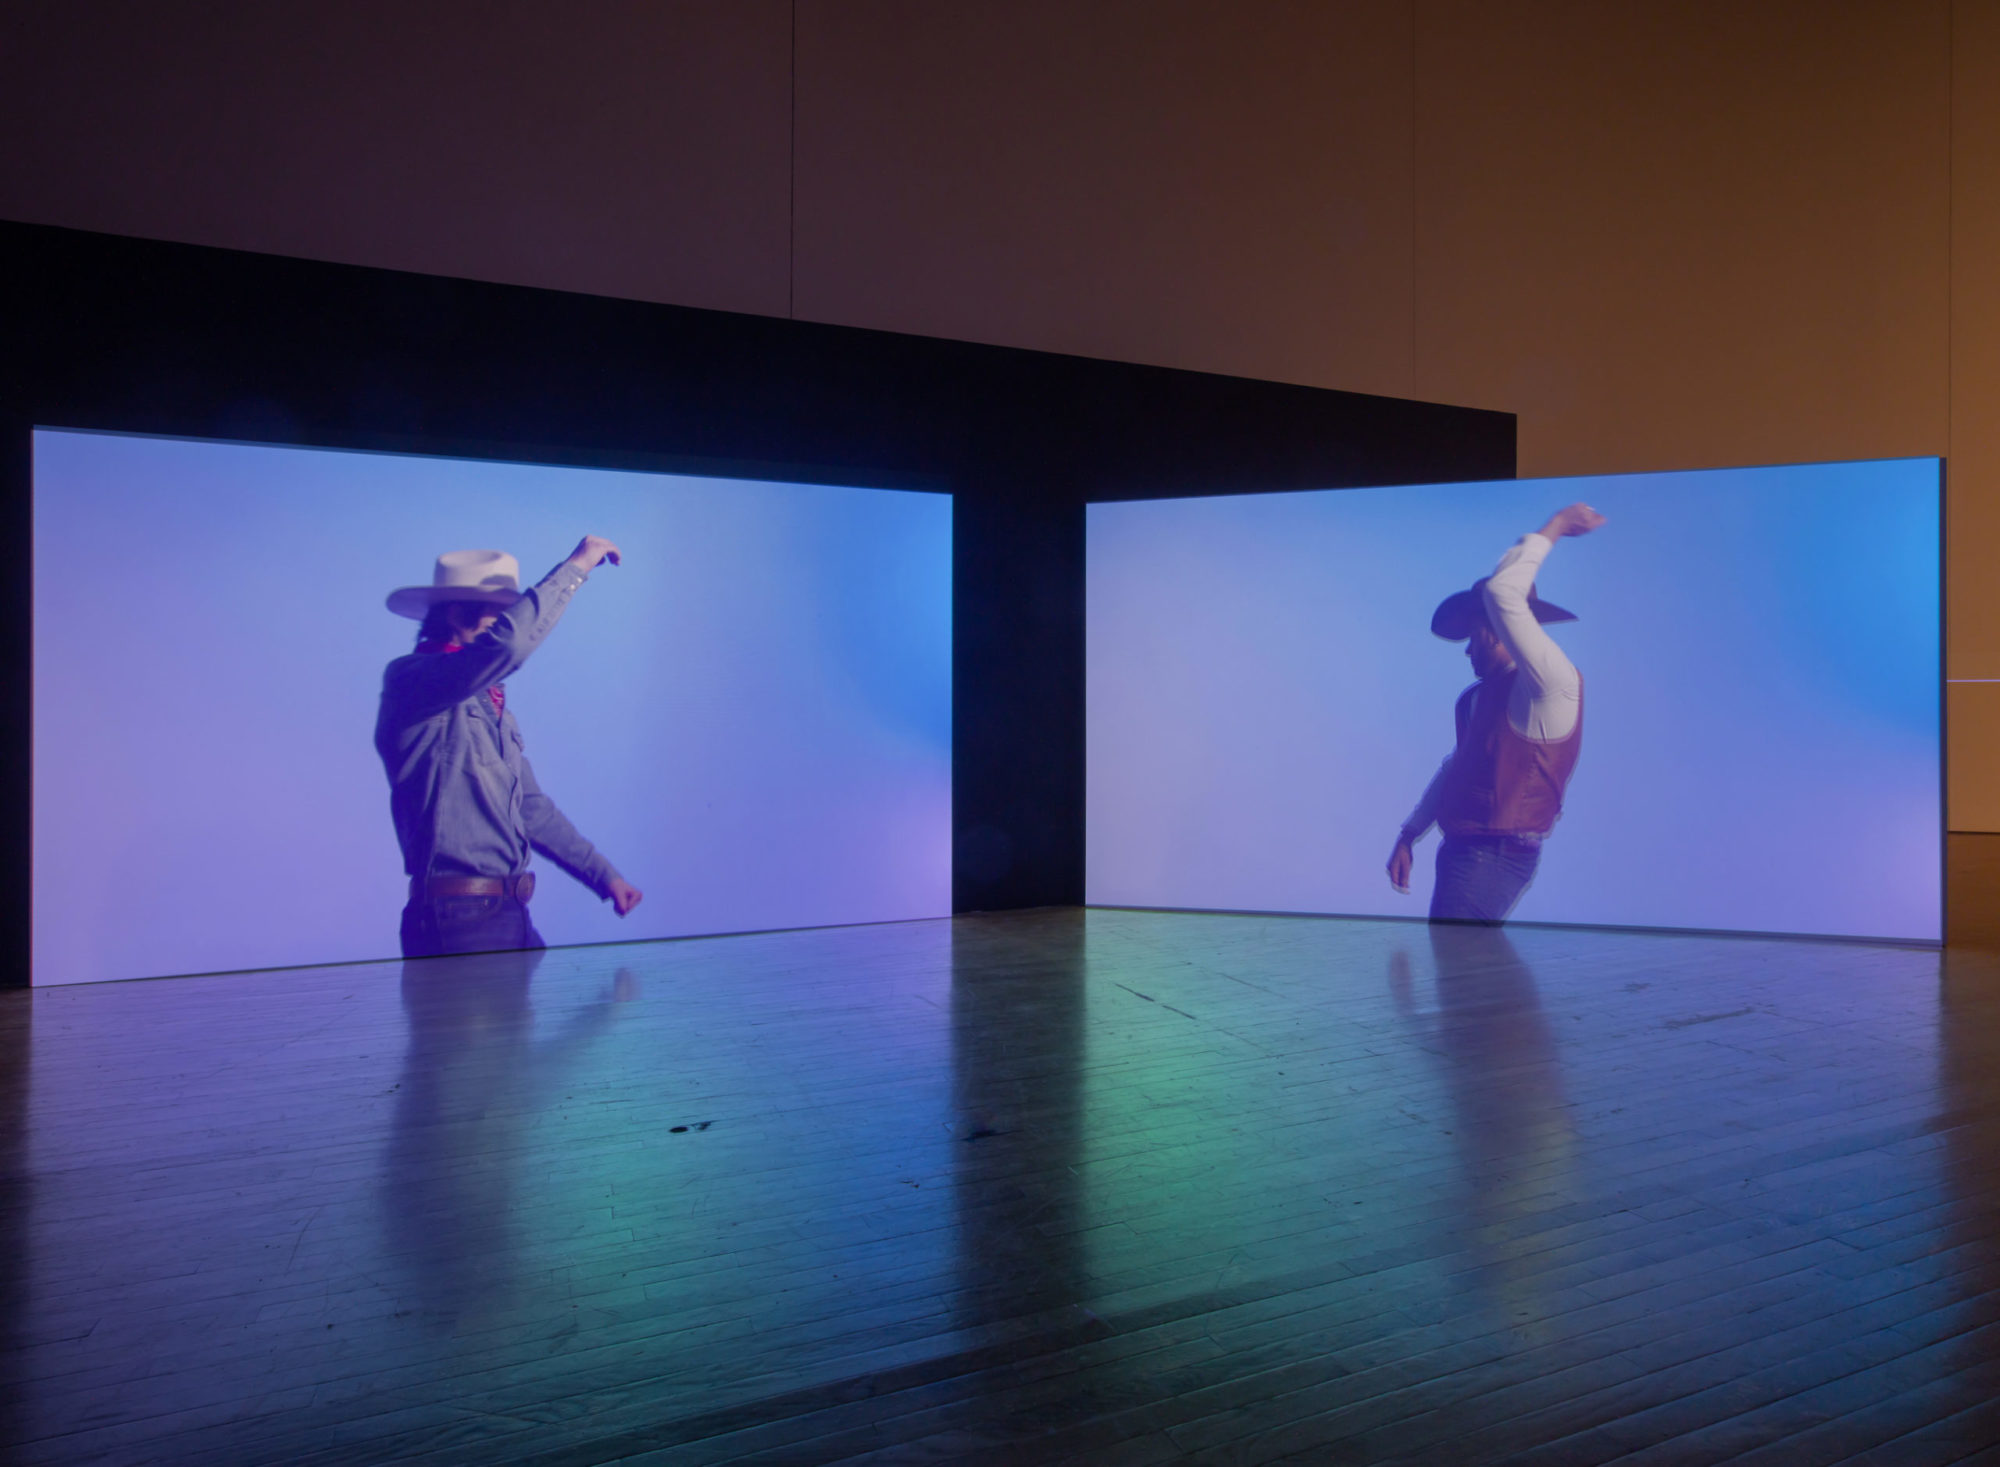 An installation view of Kenneth Tam's Silent Spikes at the Queen's Museum. Two screens are in view, both featuring cowboys dancing in front of a blurry blue and lavender background. Neither of their faces are in view. The lights in the gallery space are dimmed.